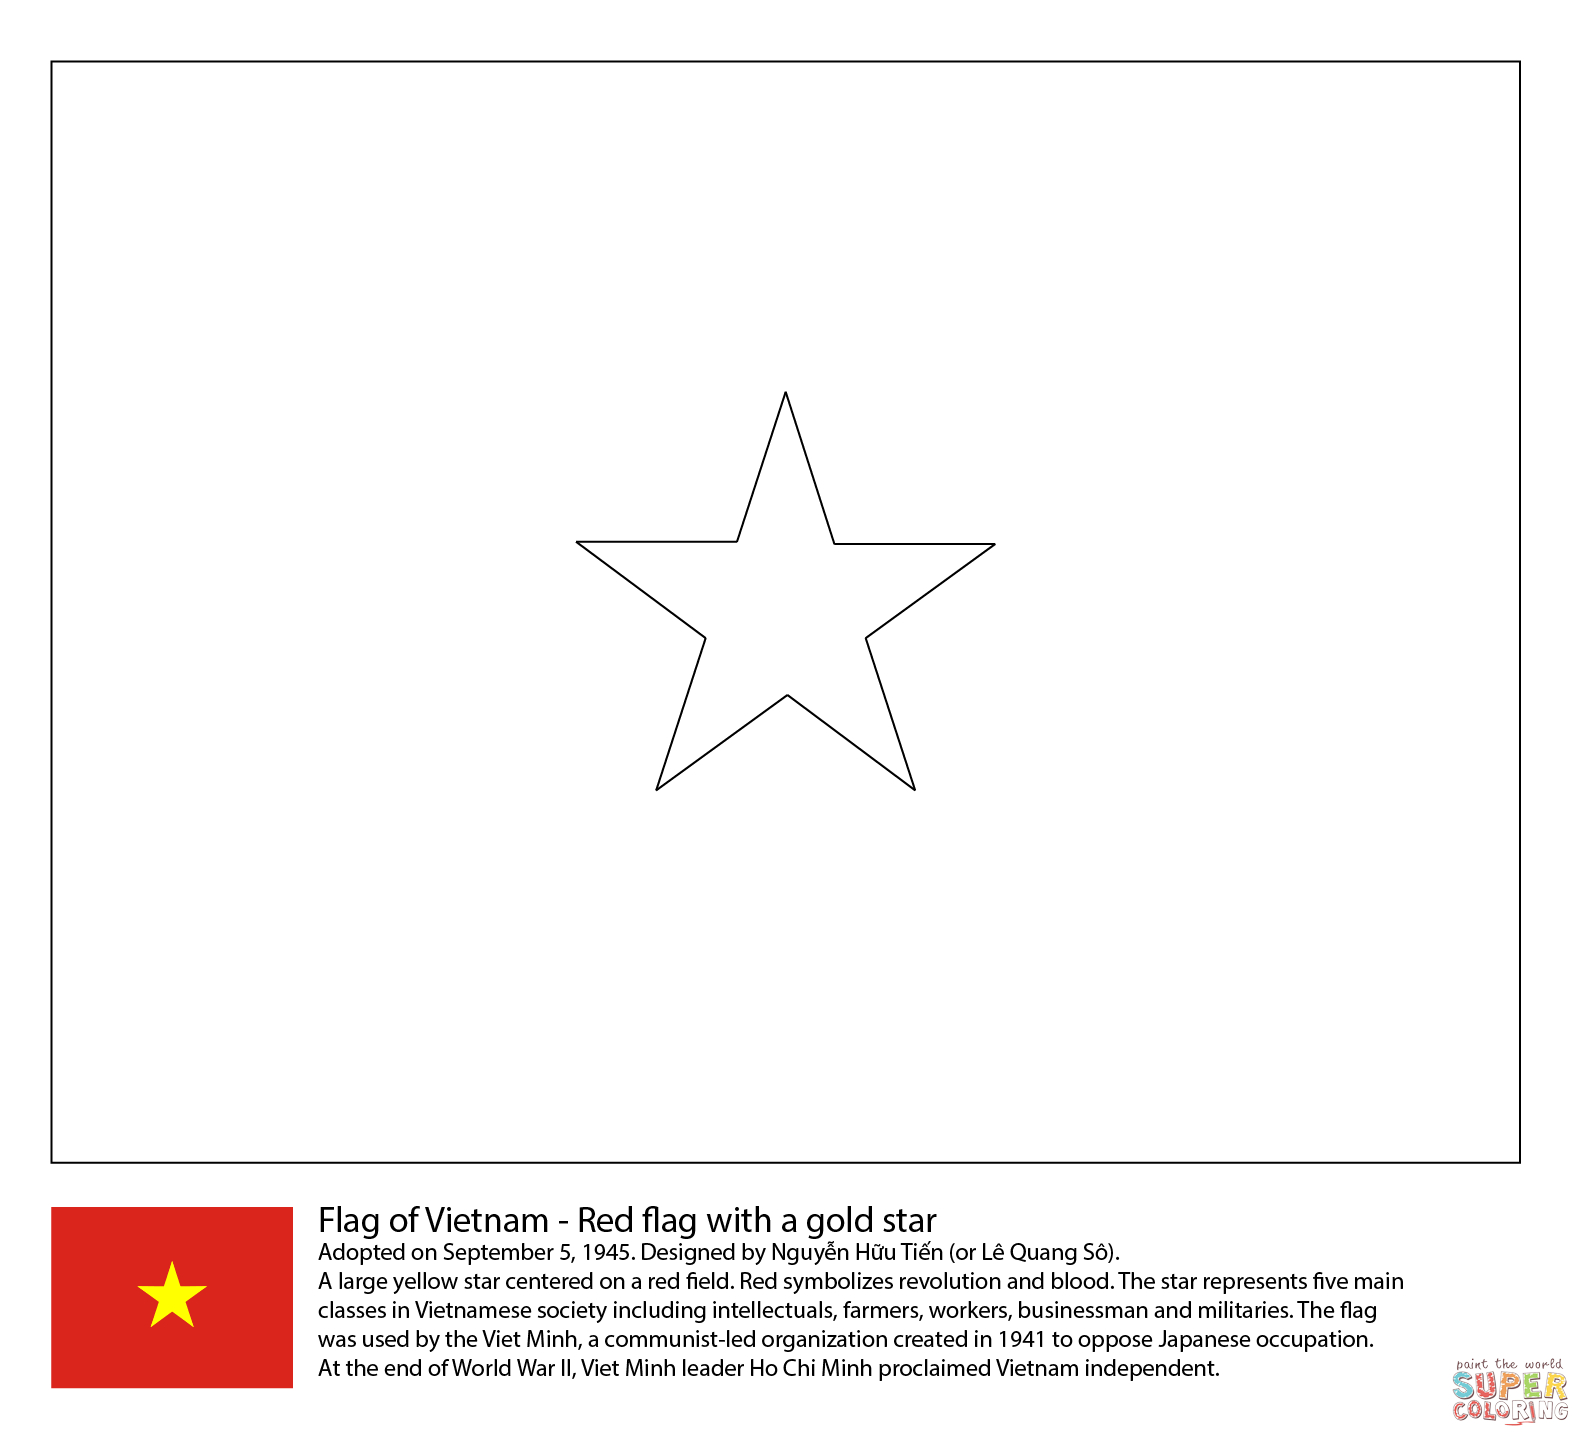 Israel Flag Coloring Page Asian Flags Coloring Pages Free Coloring Pages